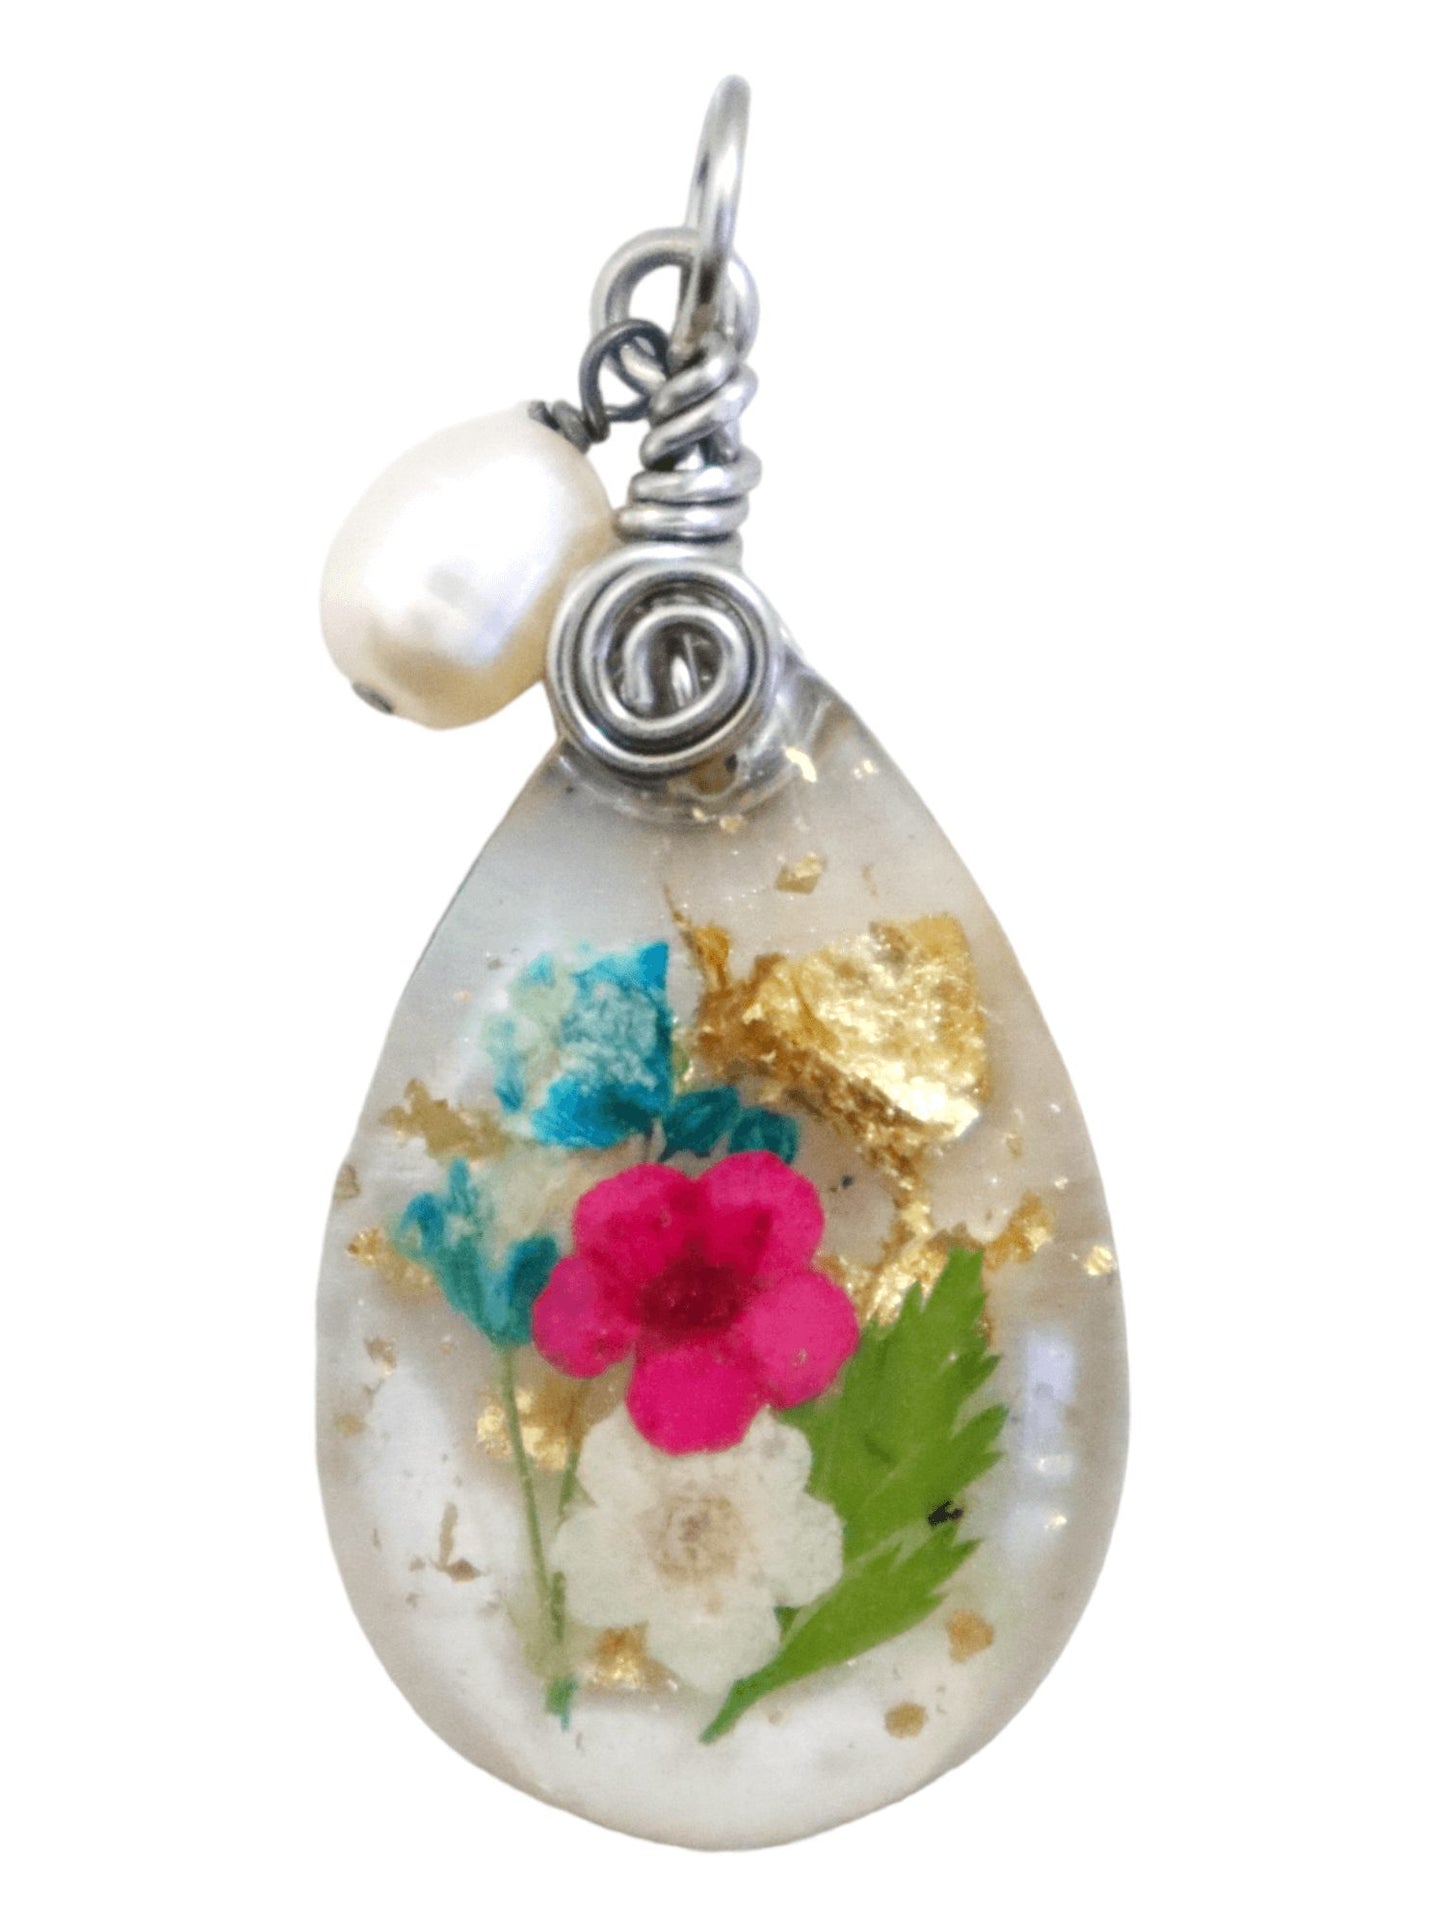 Teardrop-Pendant-With-Real-Flowers-Gold-Flakes-Pearl-Charms-Kaleidoscopes-And-Polka-Dots